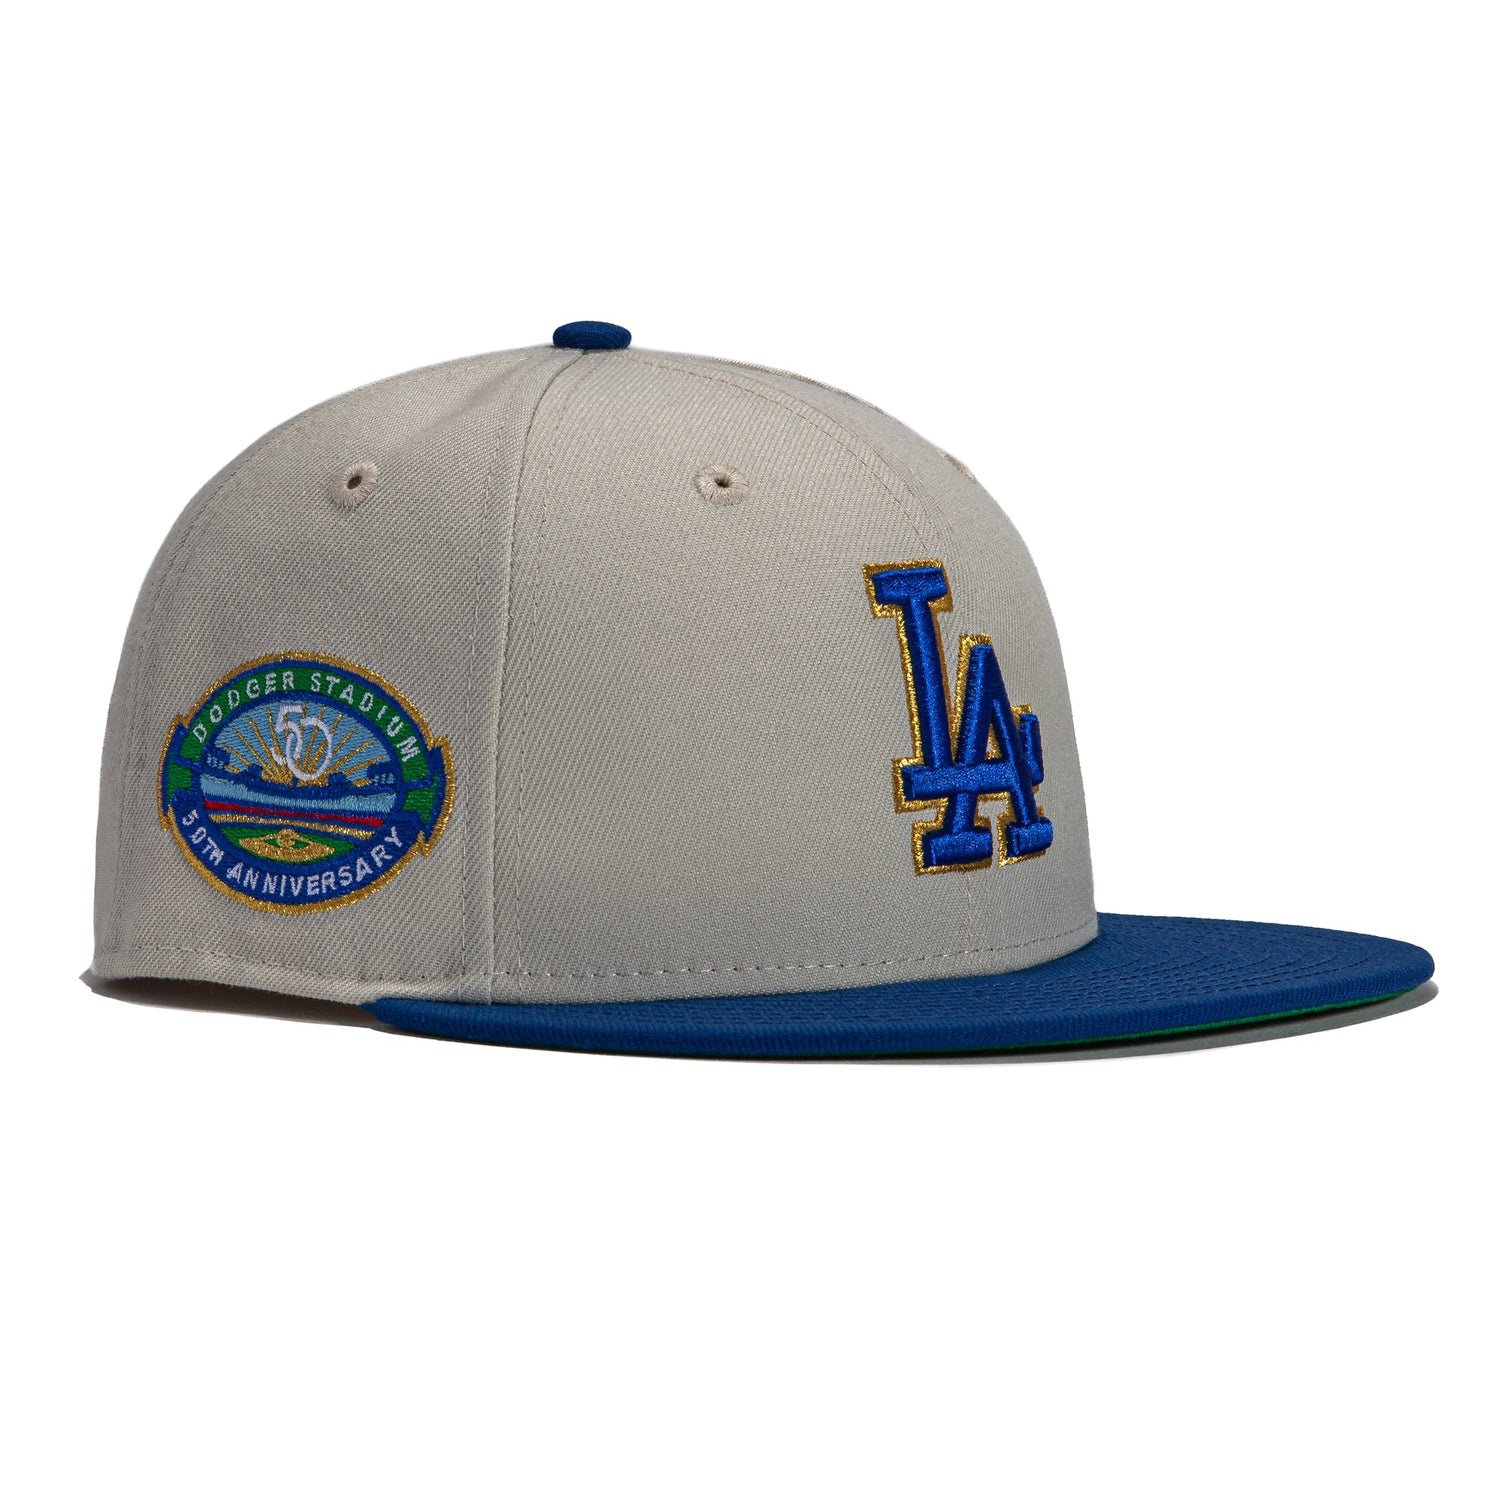 New Era 59Fifty Los Angeles Dodgers 50th Anniversary Stadium Patch